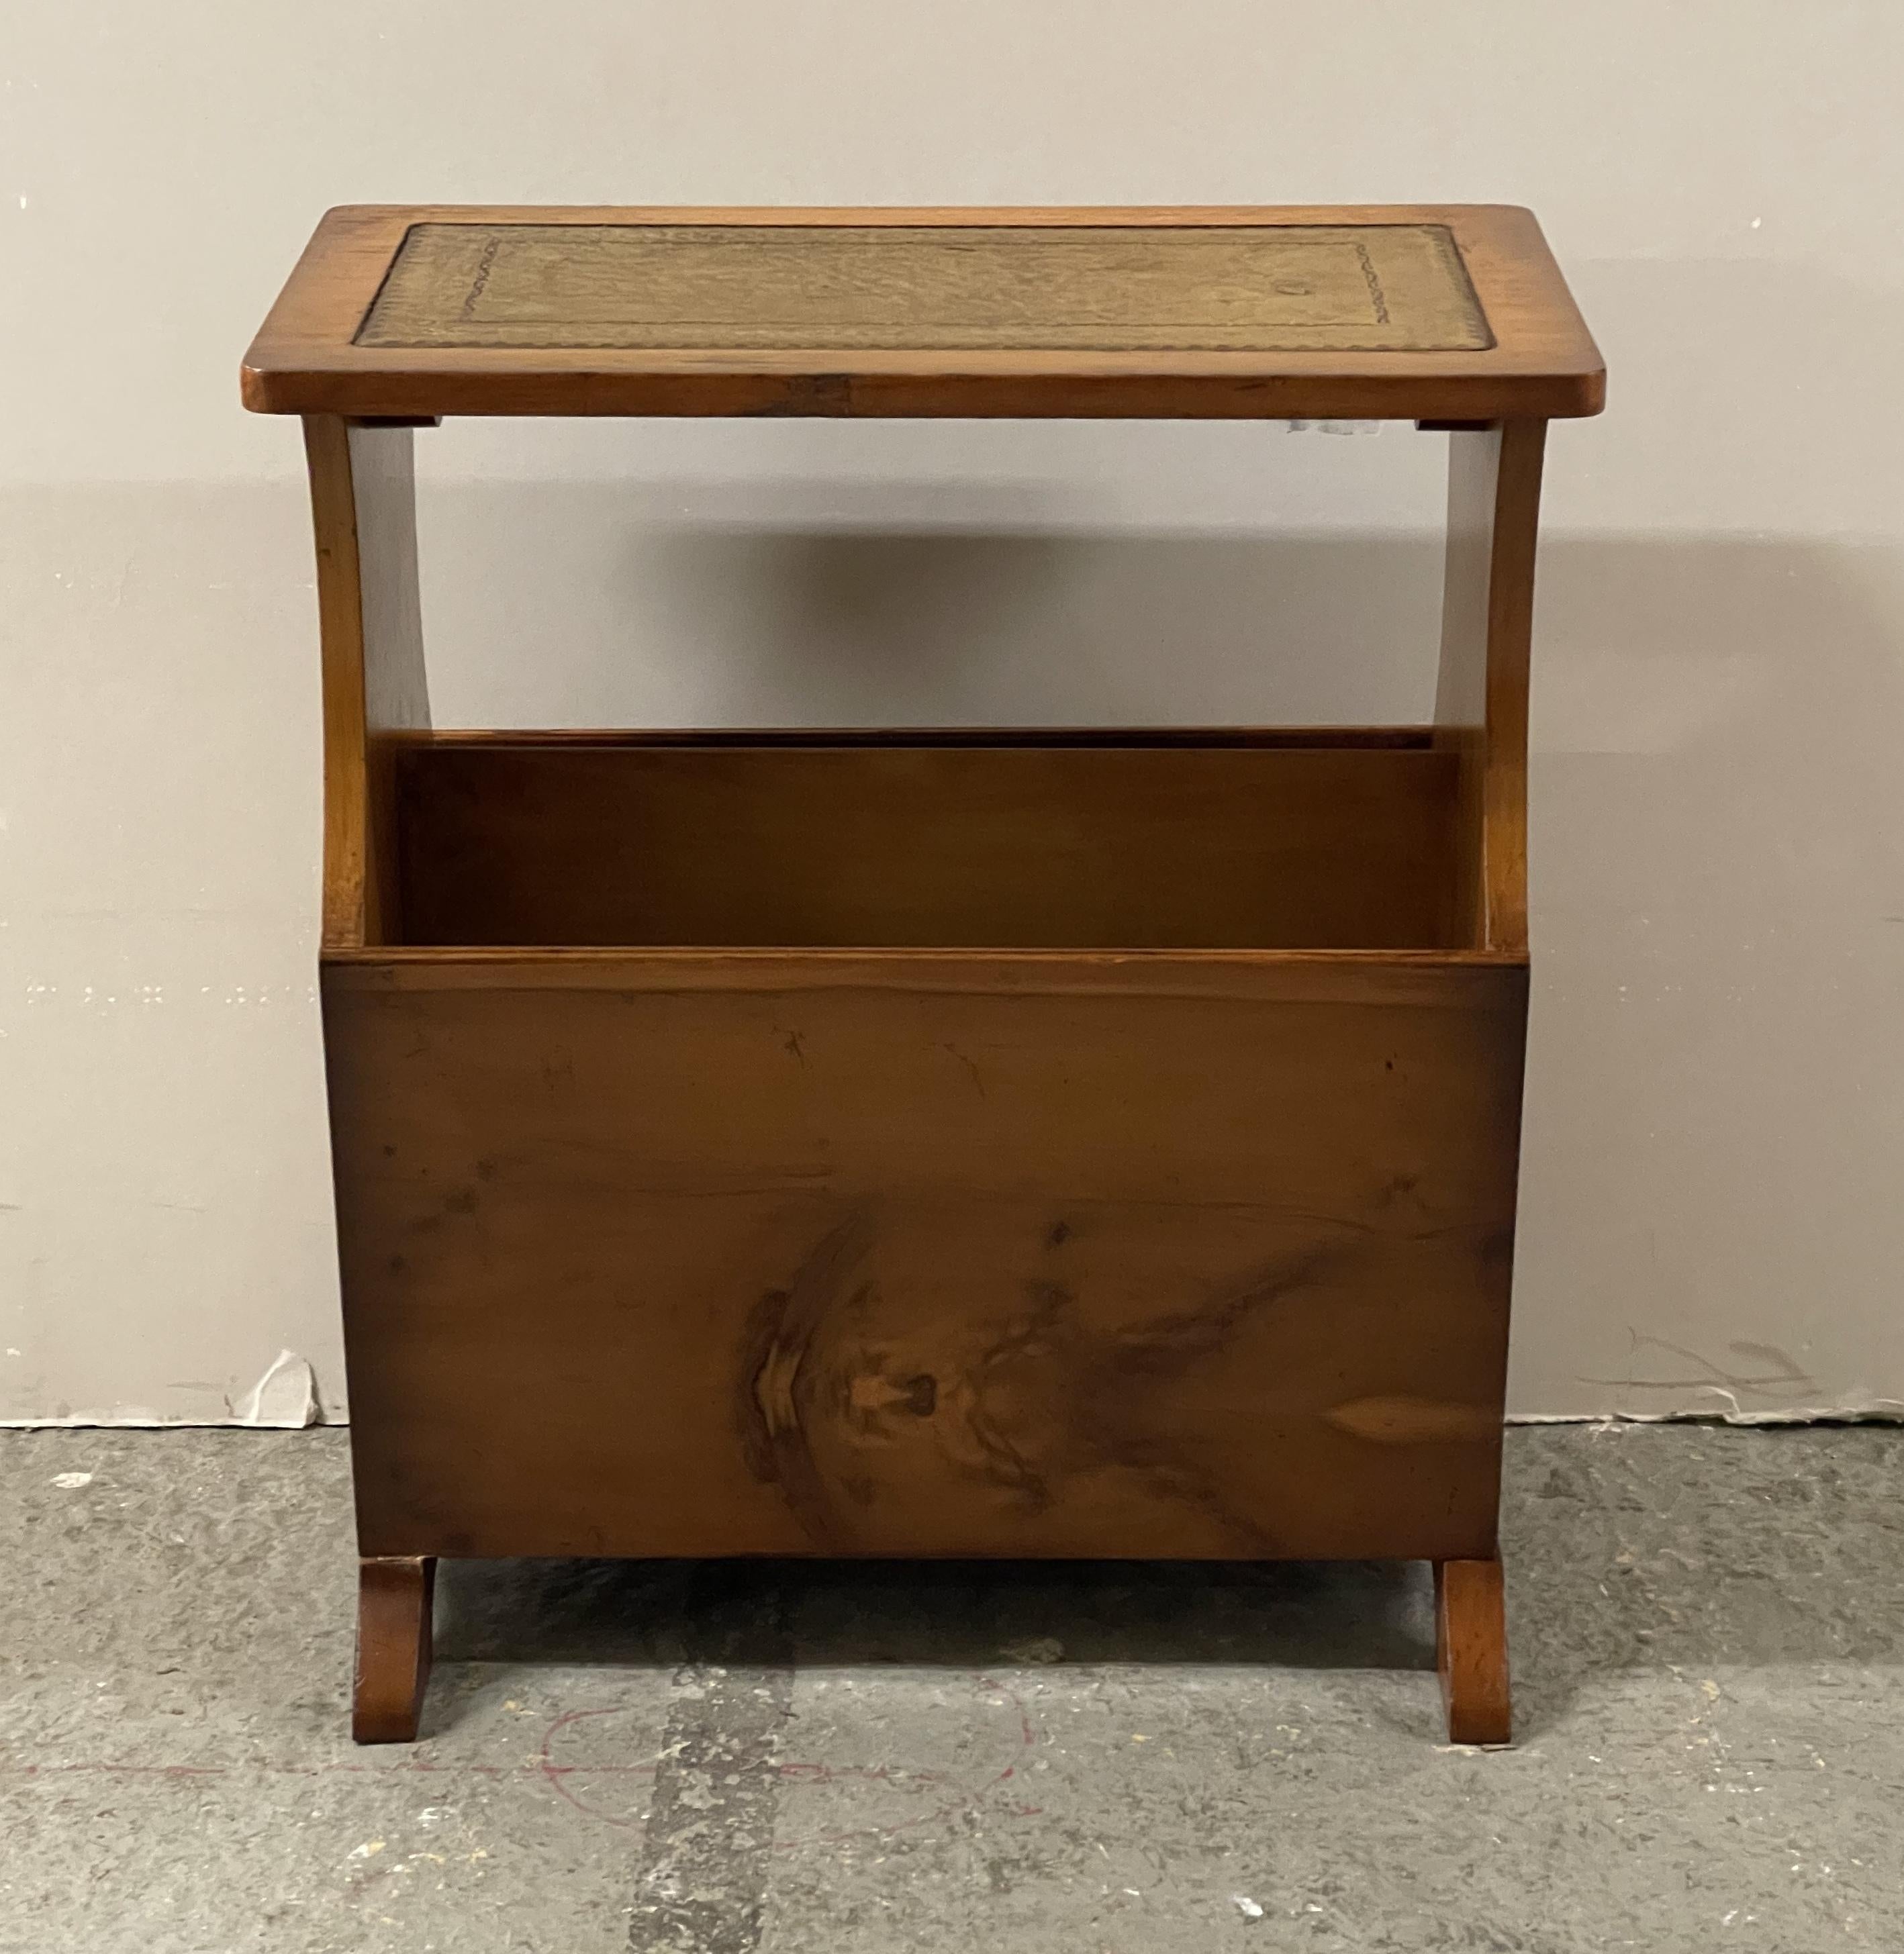 Here we have for sale this lovely vintage Bevan Funnell Ltd yew wood and green leather top magazine rack, side, end, table.

Overall, this table is in good condition with a few minor signs of wear, it has been cleaned and polished ready for its